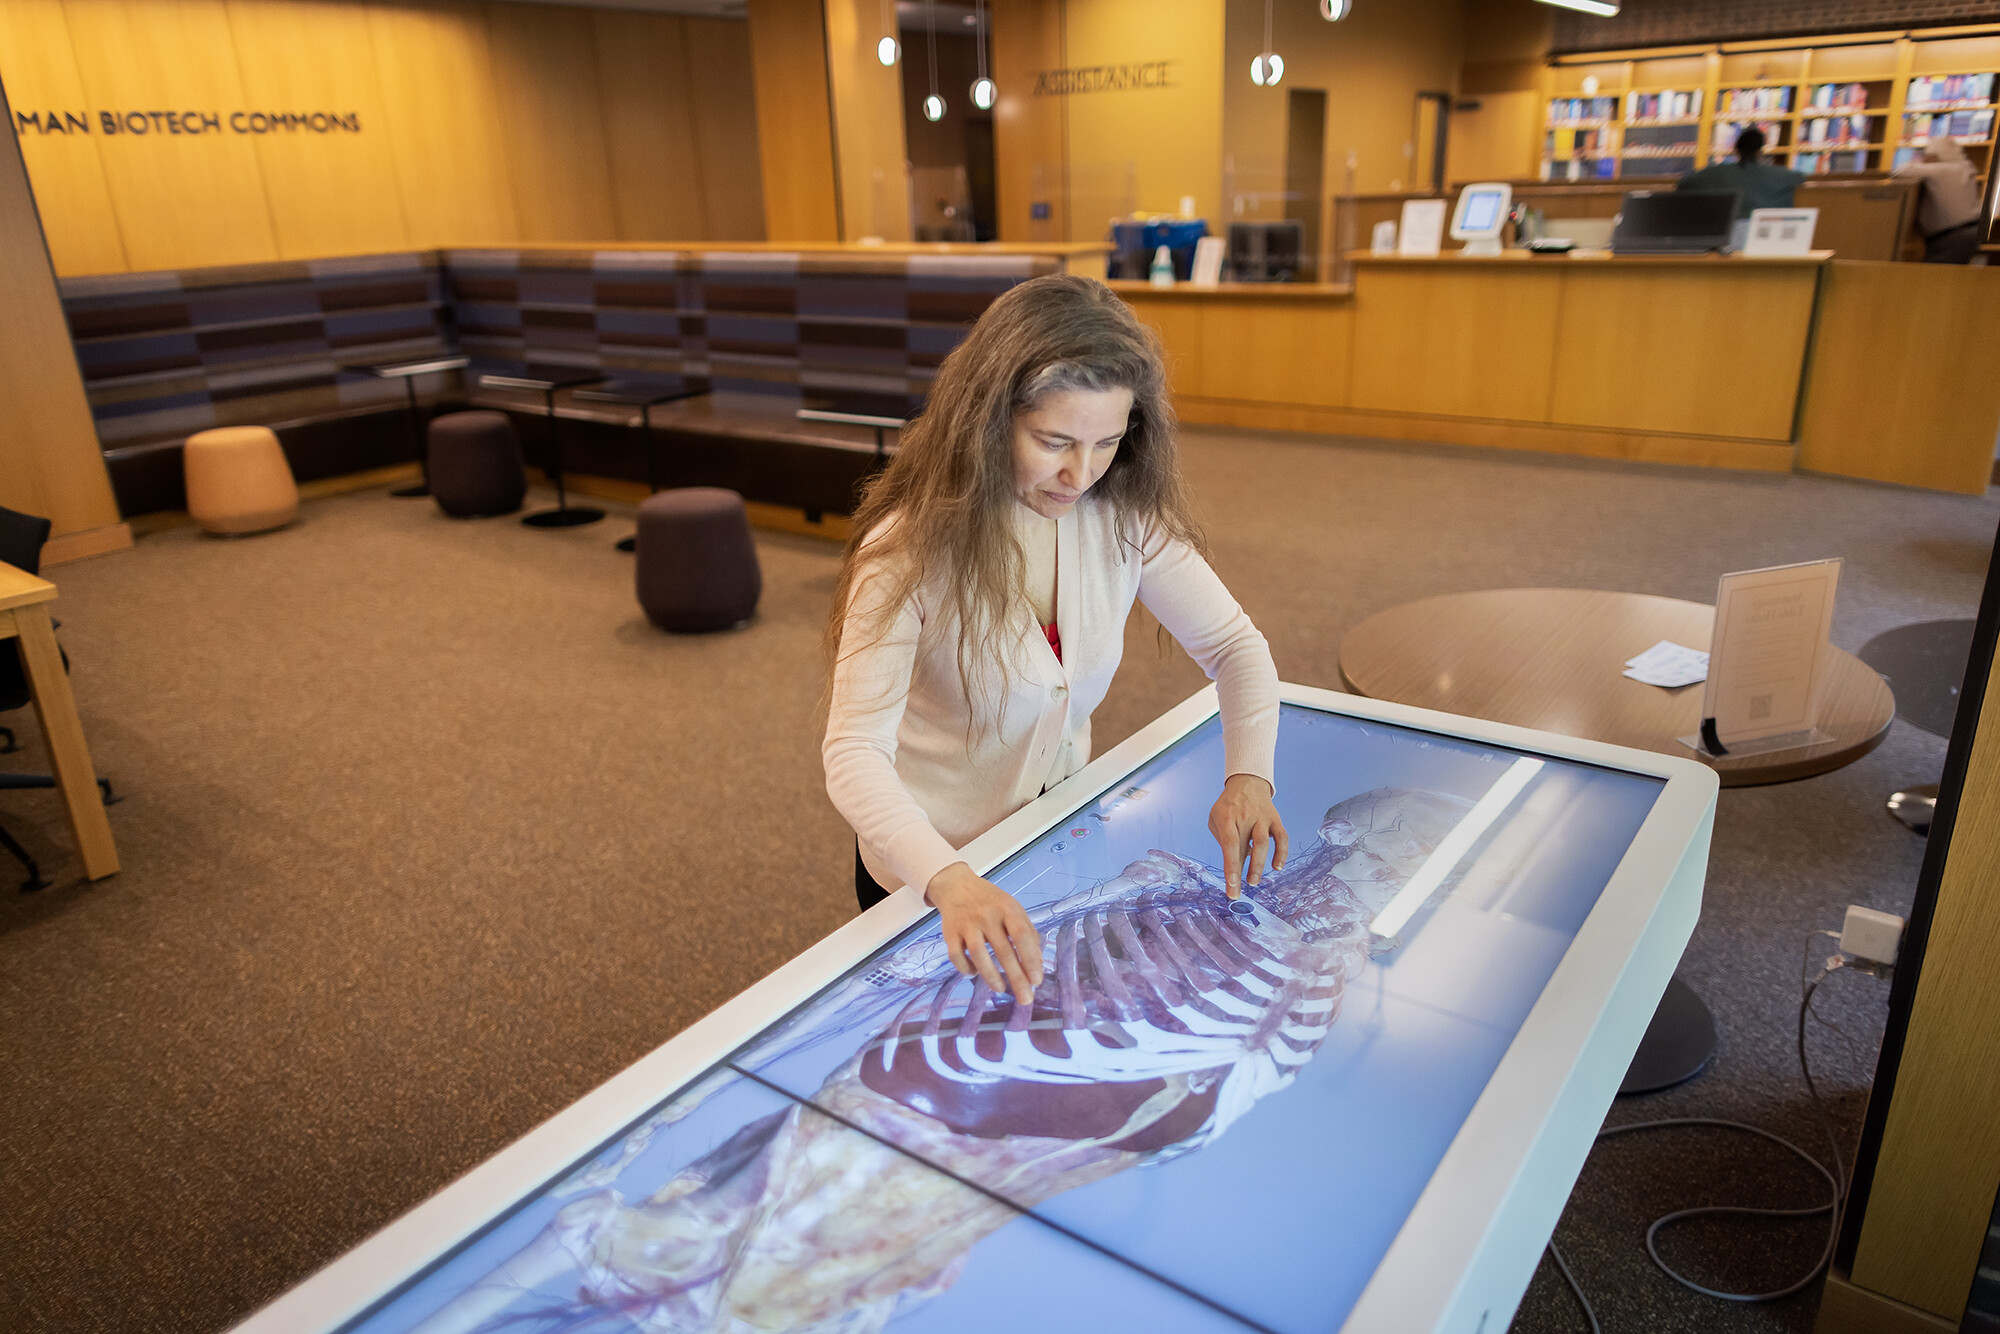 anatomage table at the holman biotech commons